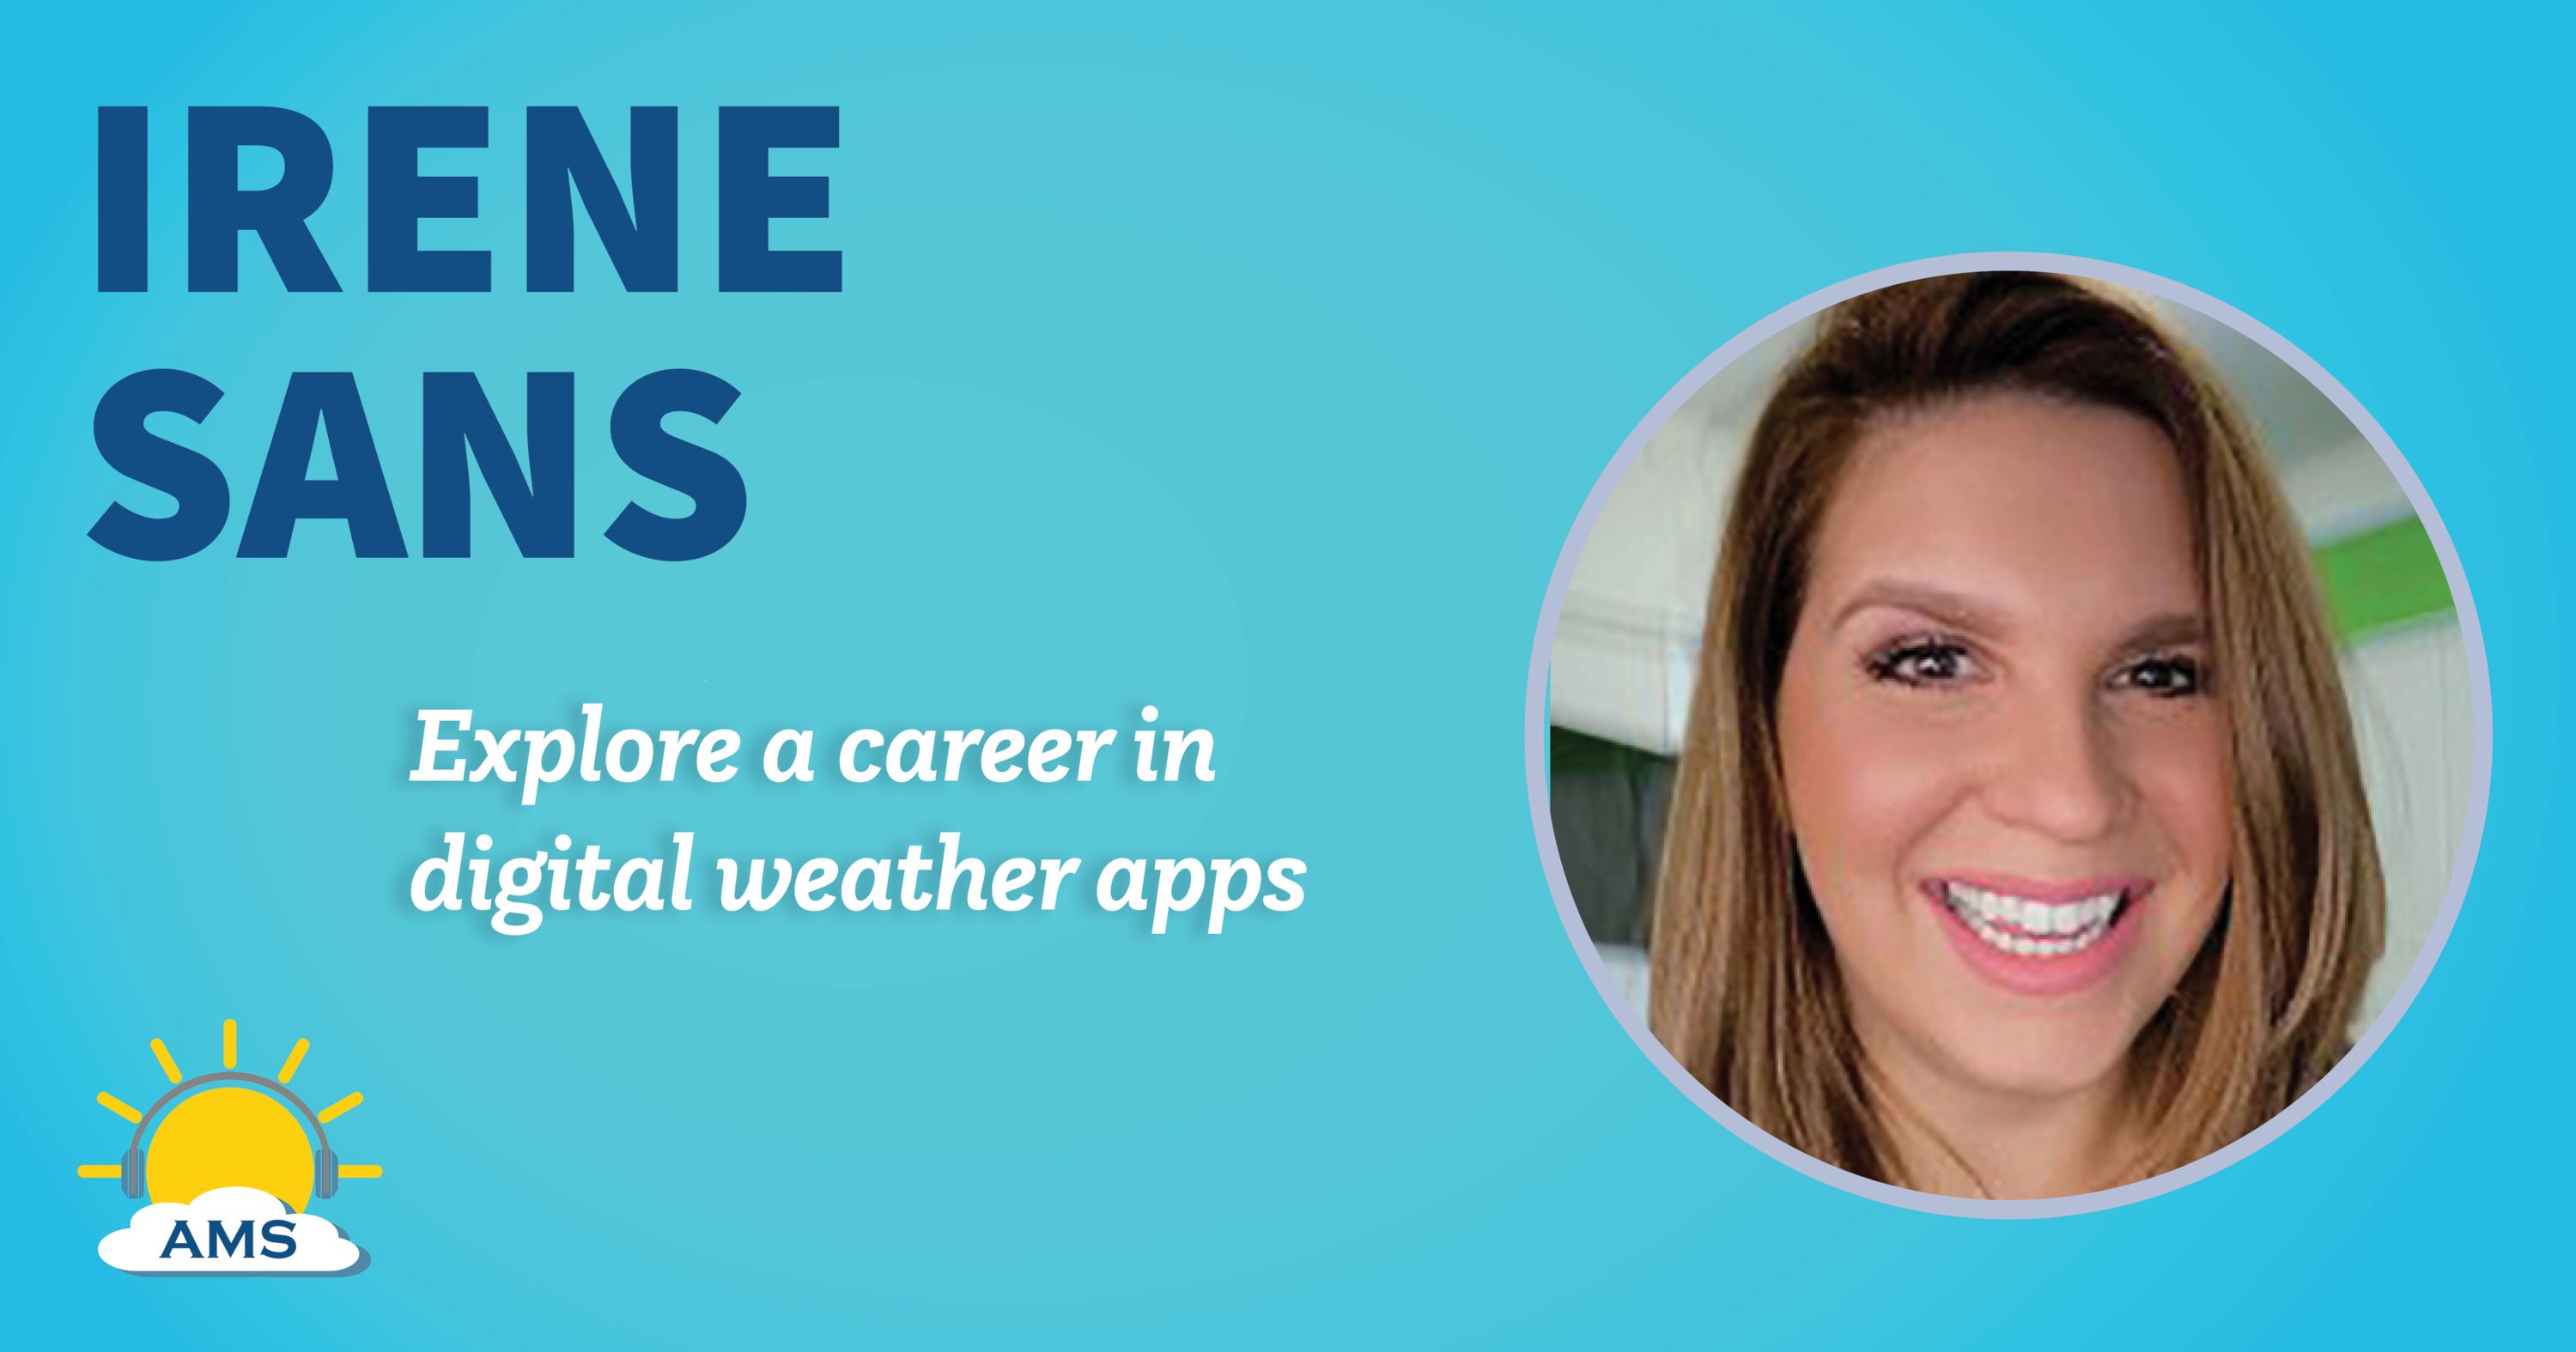 irene sans headshot graphic with teaser text that reads &quotexplore a career in digital weather apps"